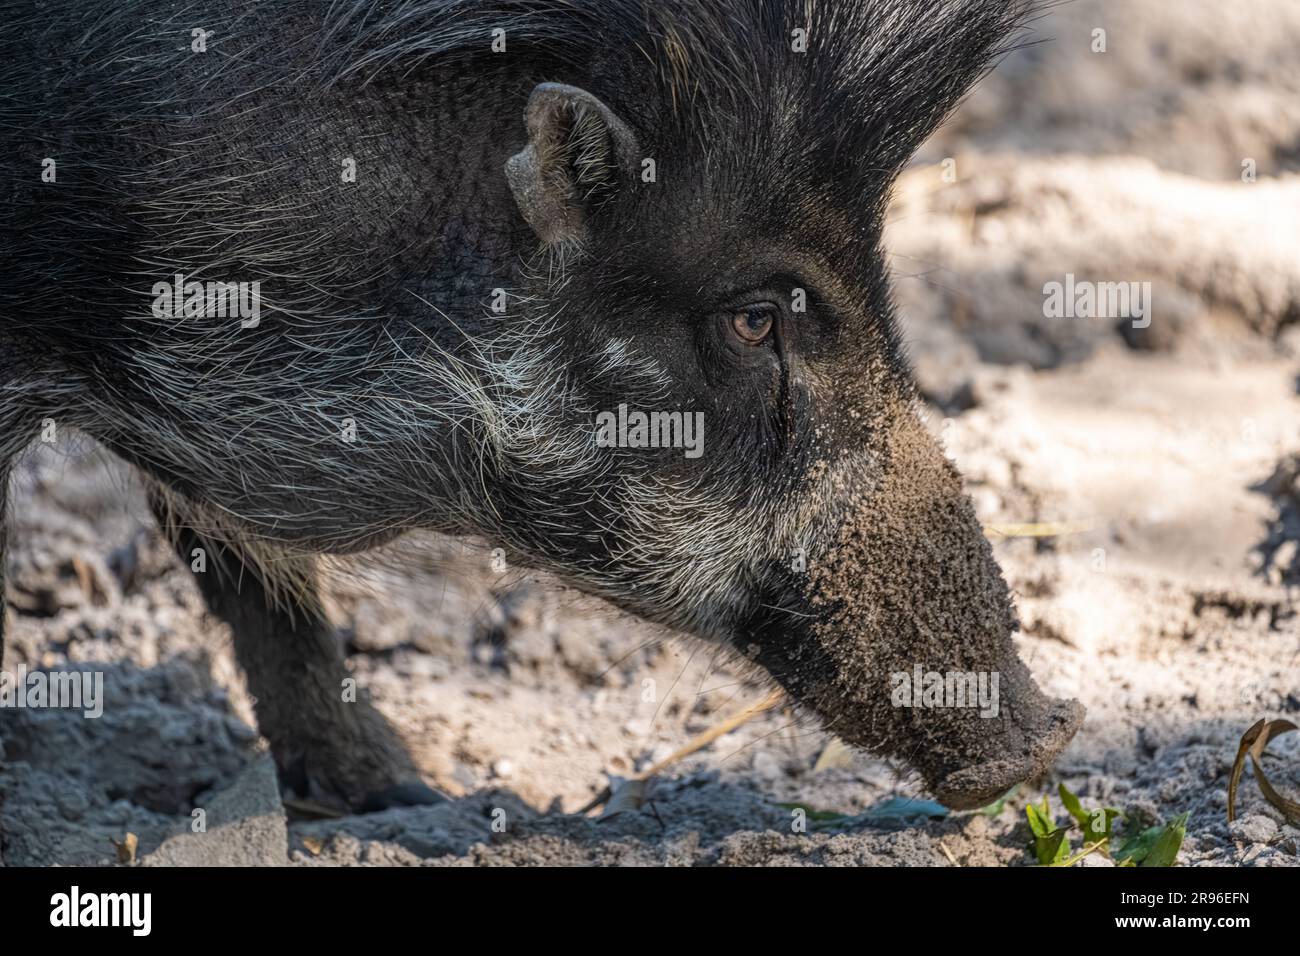 A critically endangered Visayan warty pig at Jacksonville Zoo and Gardens in Jacksonville, Florida. (USA) Stock Photo